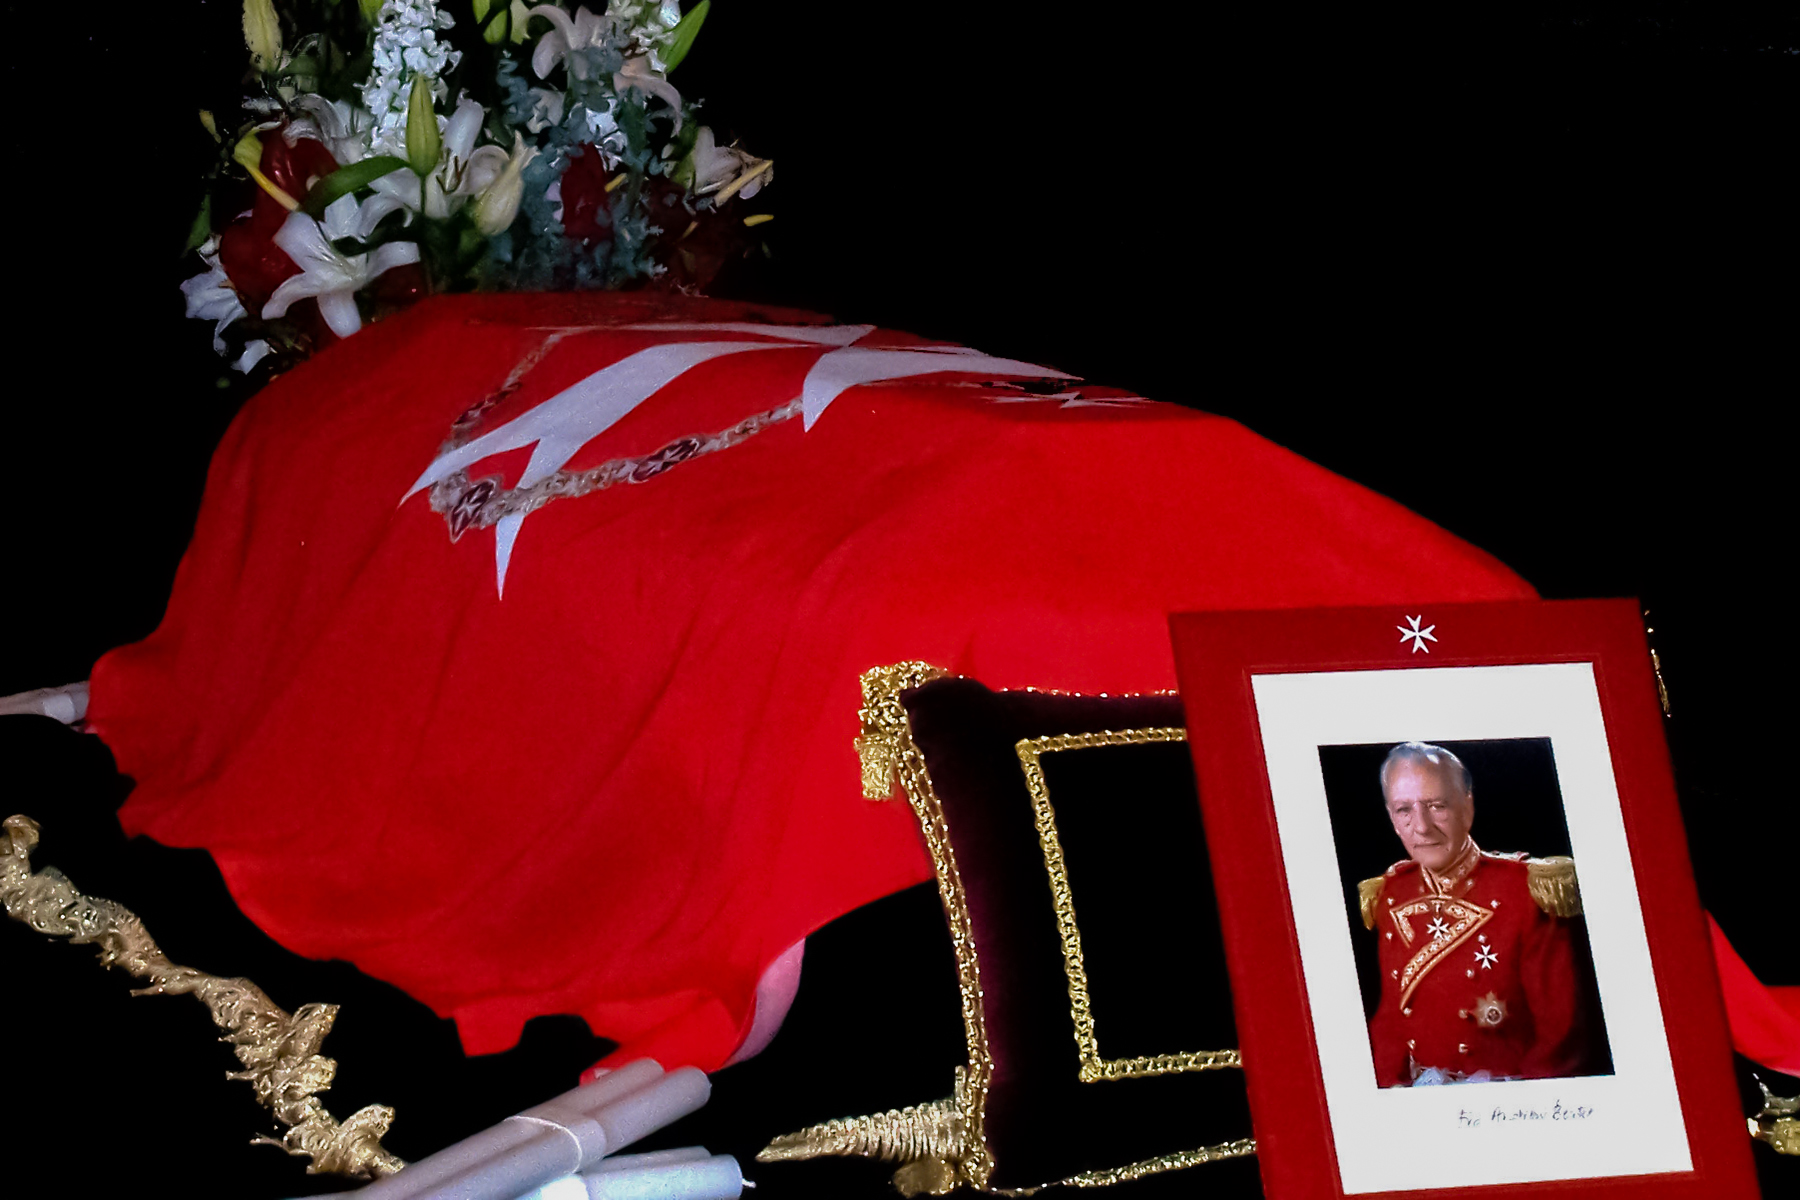 The solemn memorial mass for the Grand Master of the Order of Malta